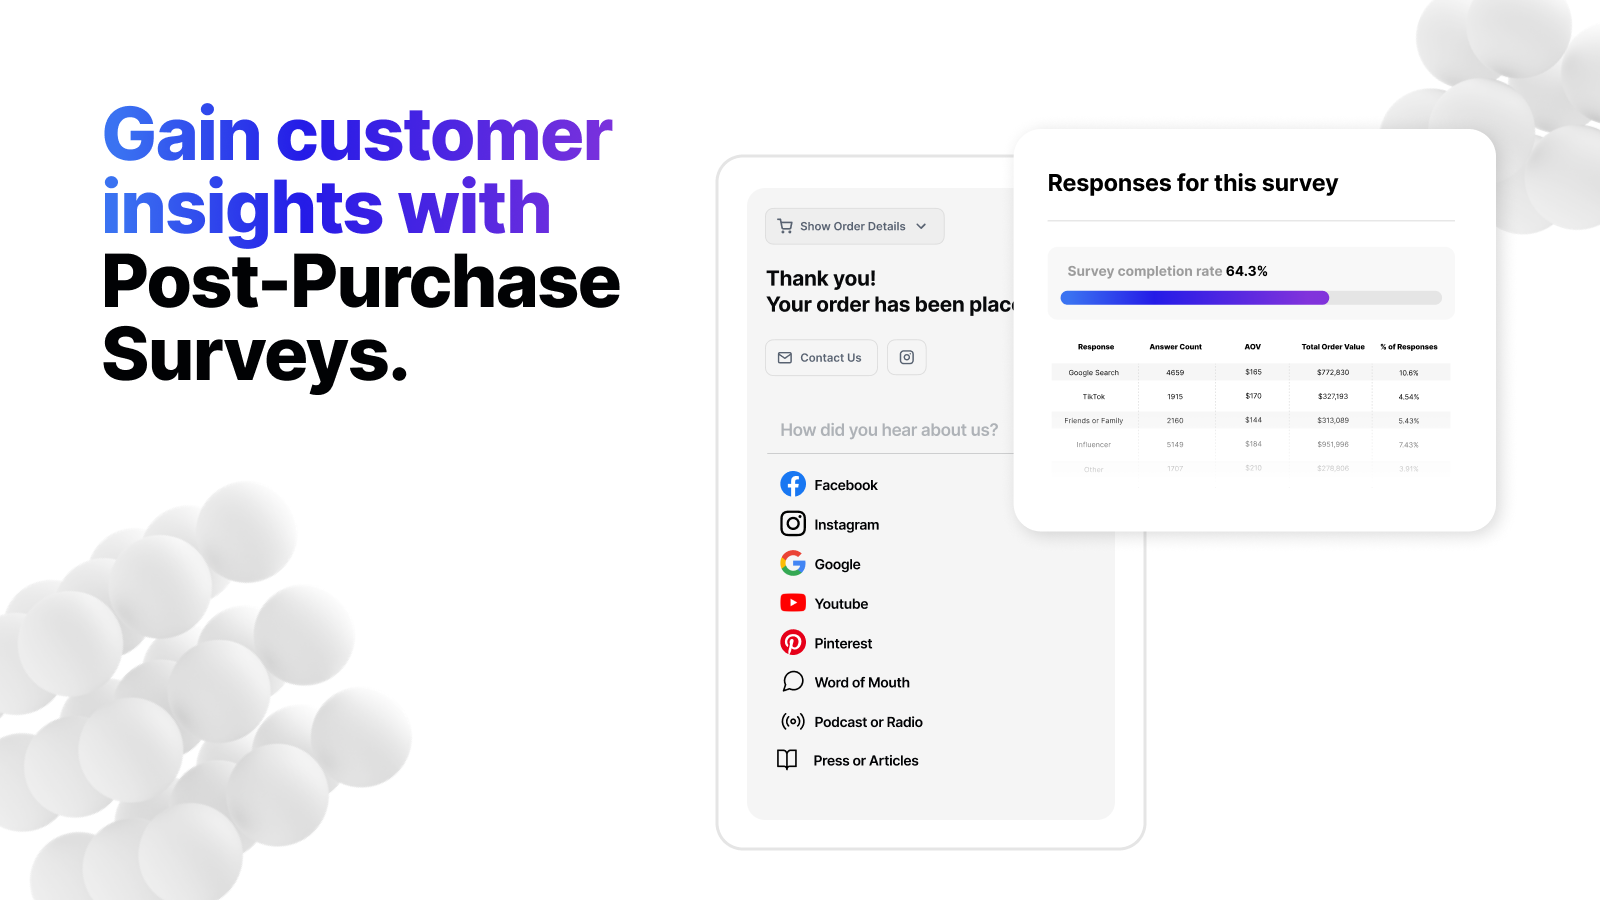 Gain customer insights with Post-Purchase Surveys.